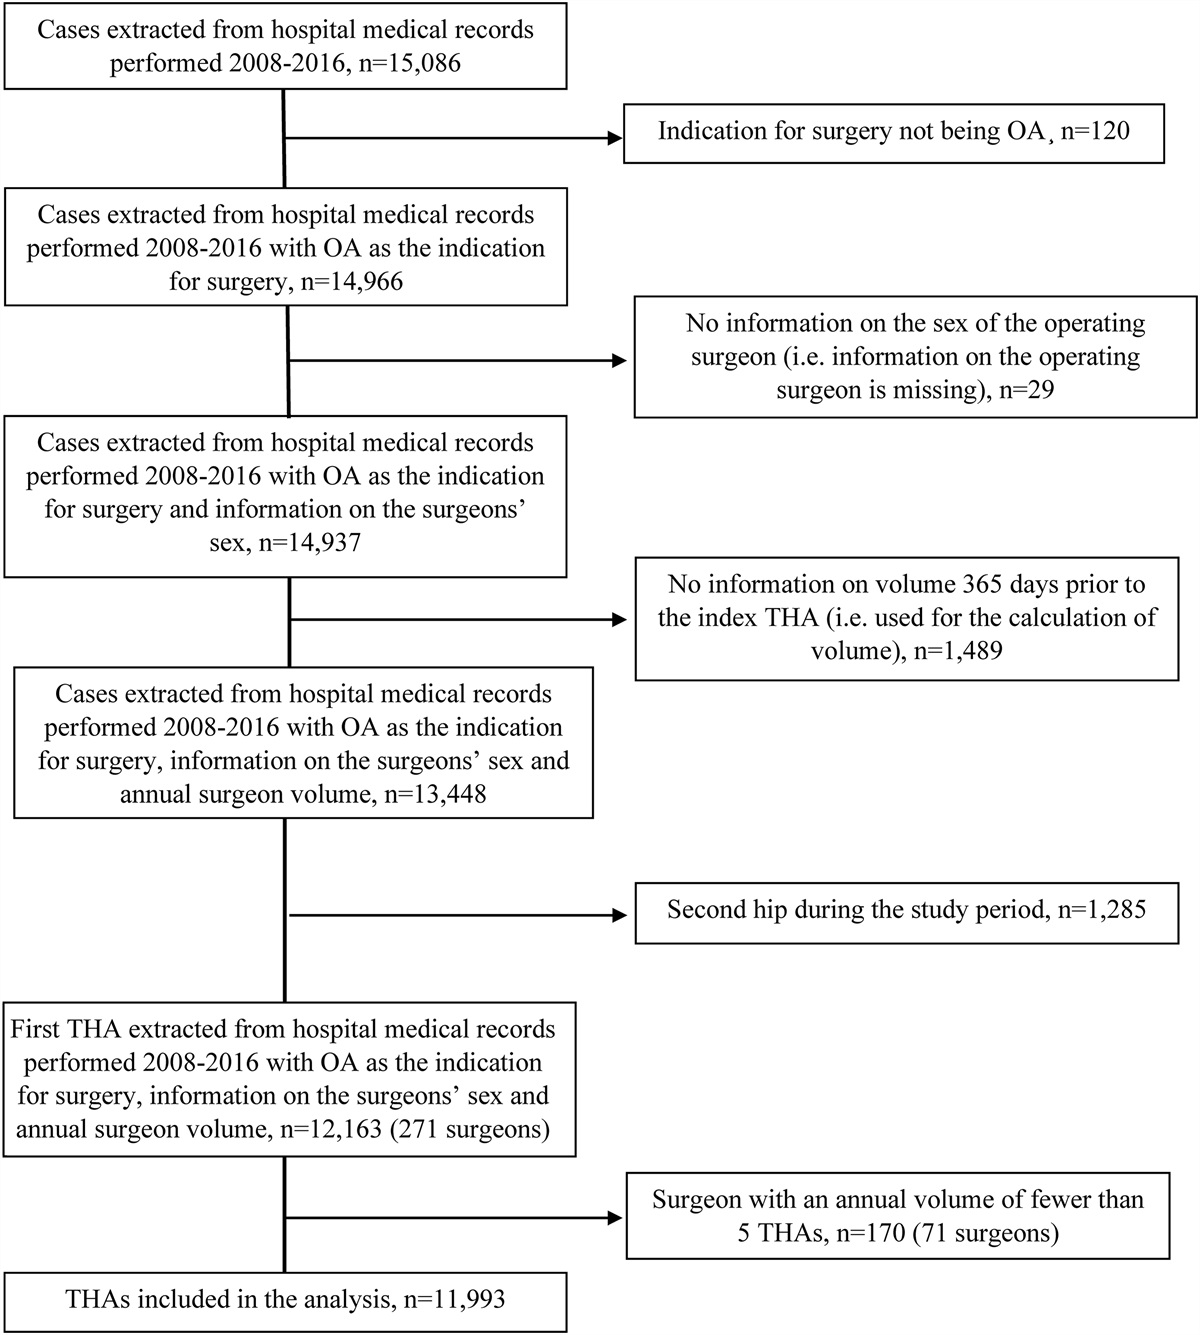 The Influence of Surgeon Sex on Adverse Events Following Primary Total Hip Arthroplasty: A Register-Based Study of 11,993 Procedures and 200 Surgeons in Swedish Public Hospitals